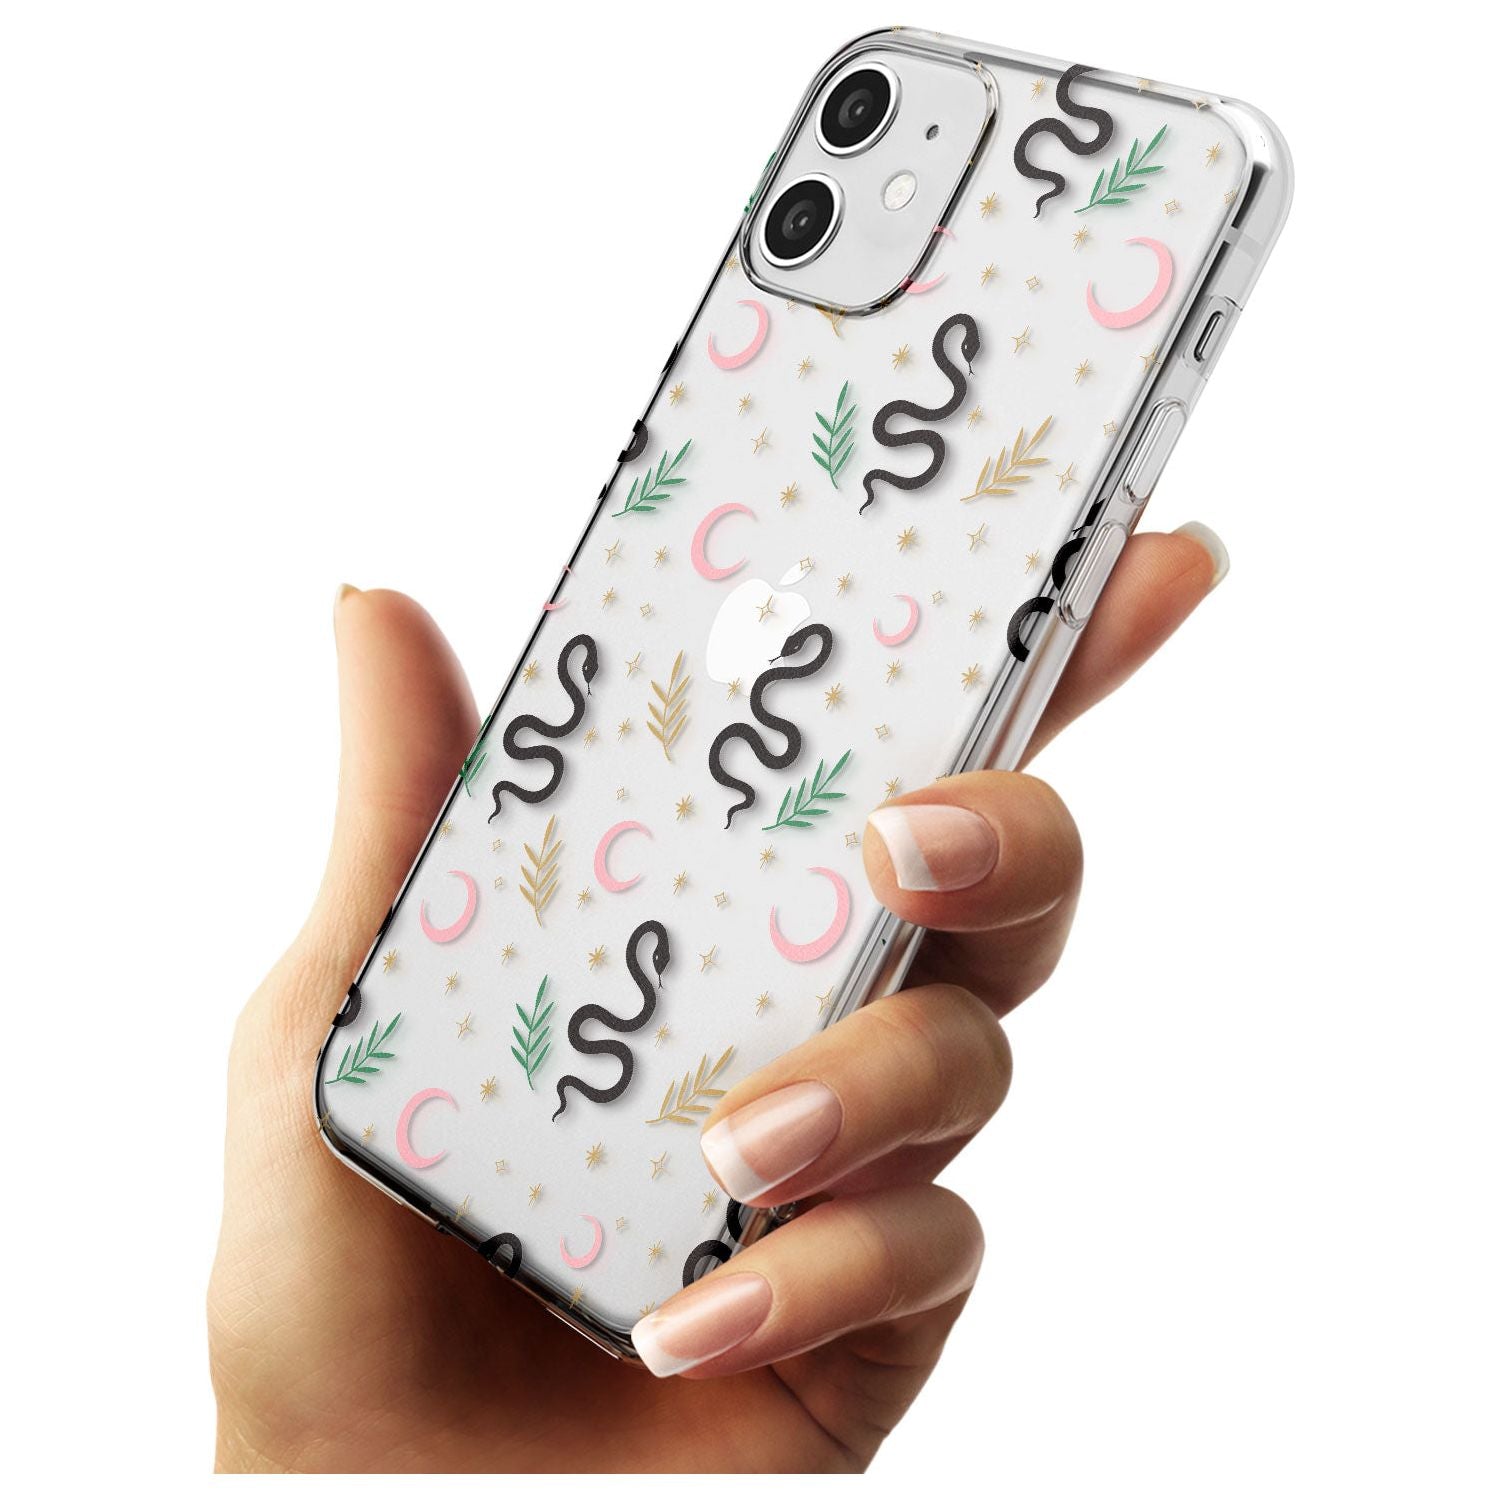 Snake & Moon Pattern (Clear) Black Impact Phone Case for iPhone 11